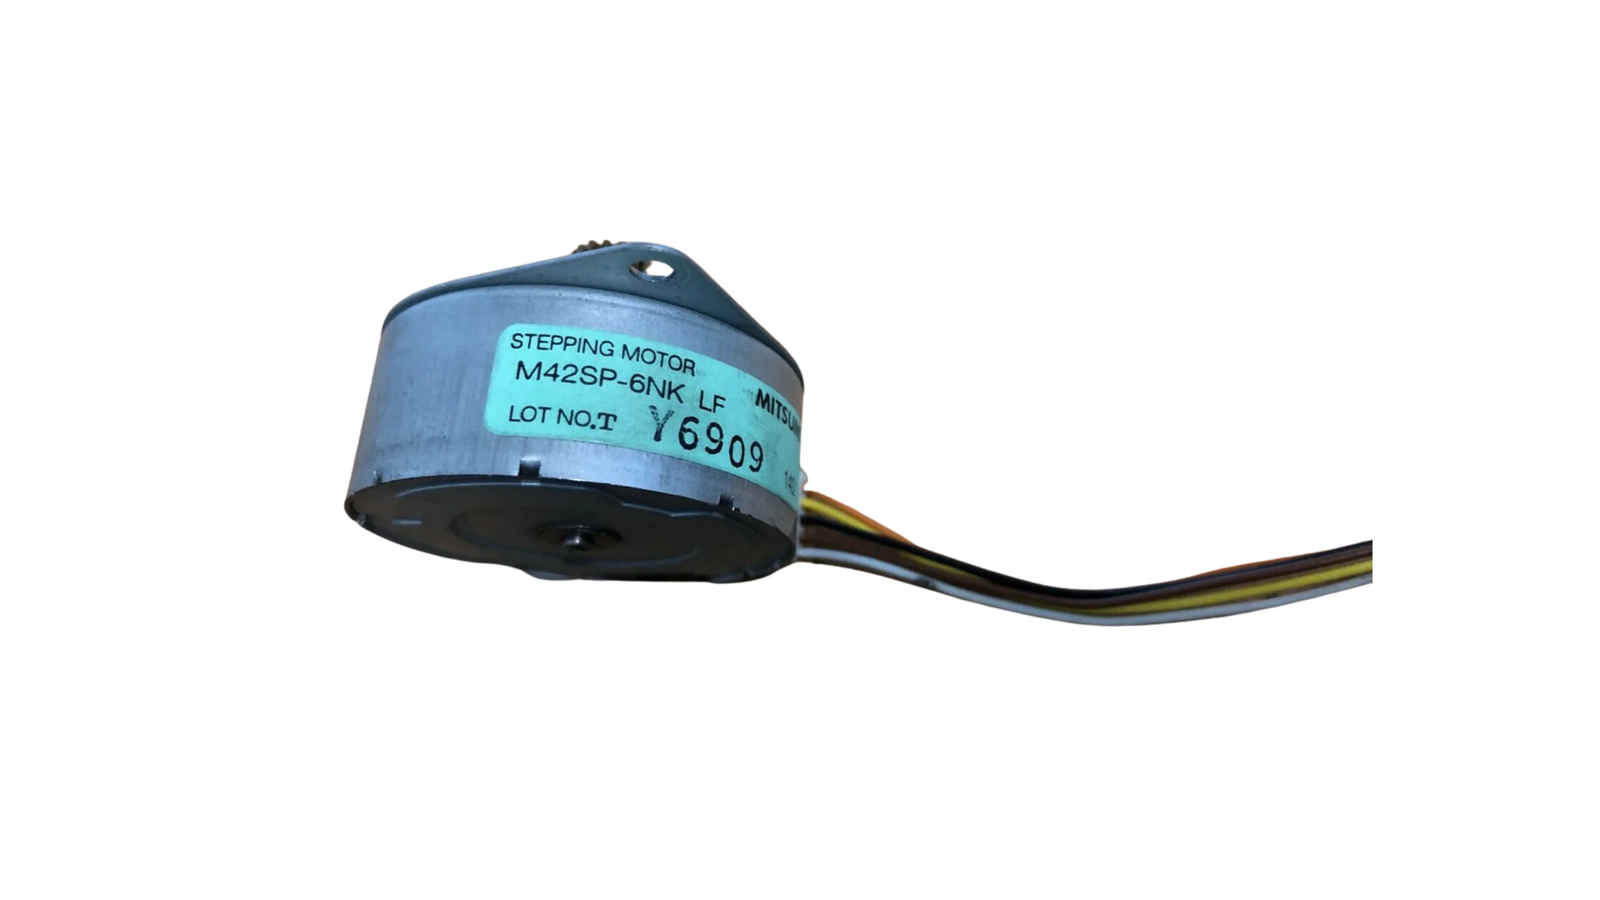 Stepping motor M42SP-6NK for Xerox Phaser 4500/4510